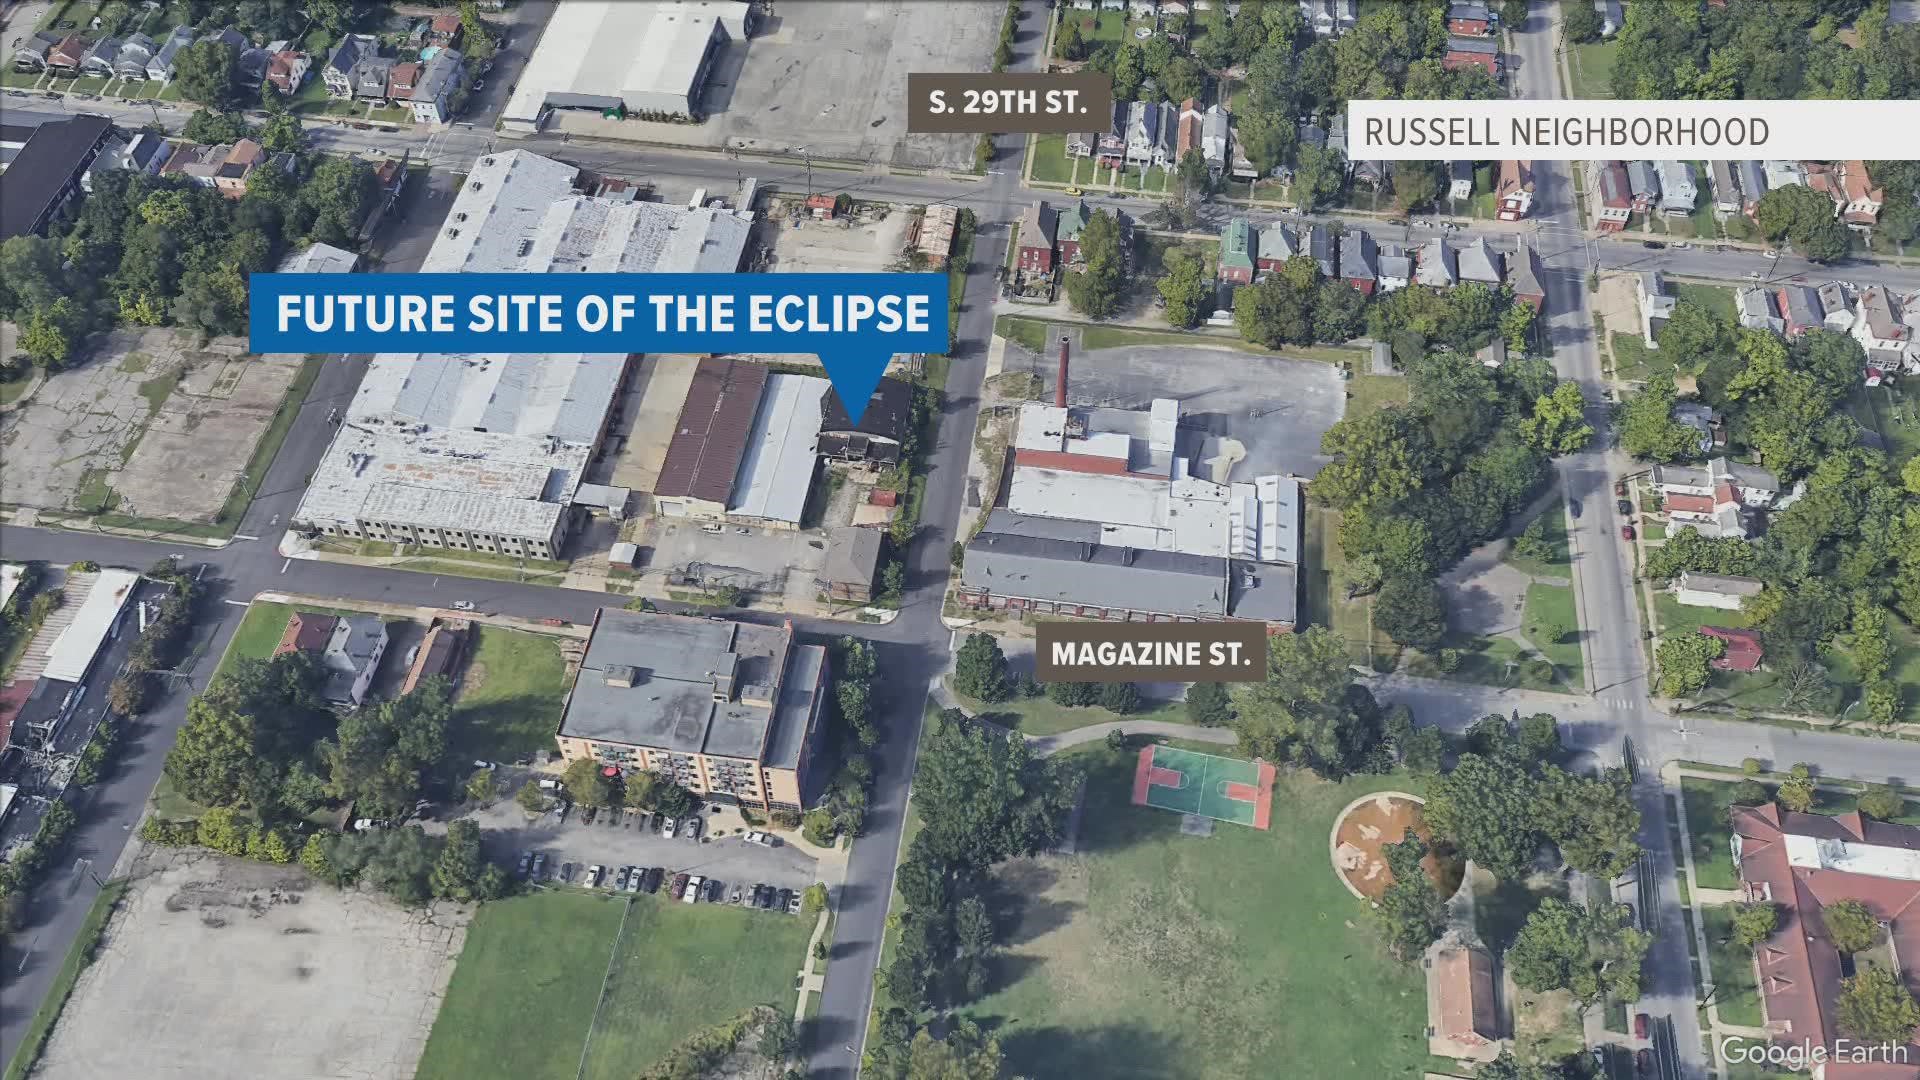 The $75 million project is called the "Eclipse" and will be housed on South 29th Street at Magazine Street.